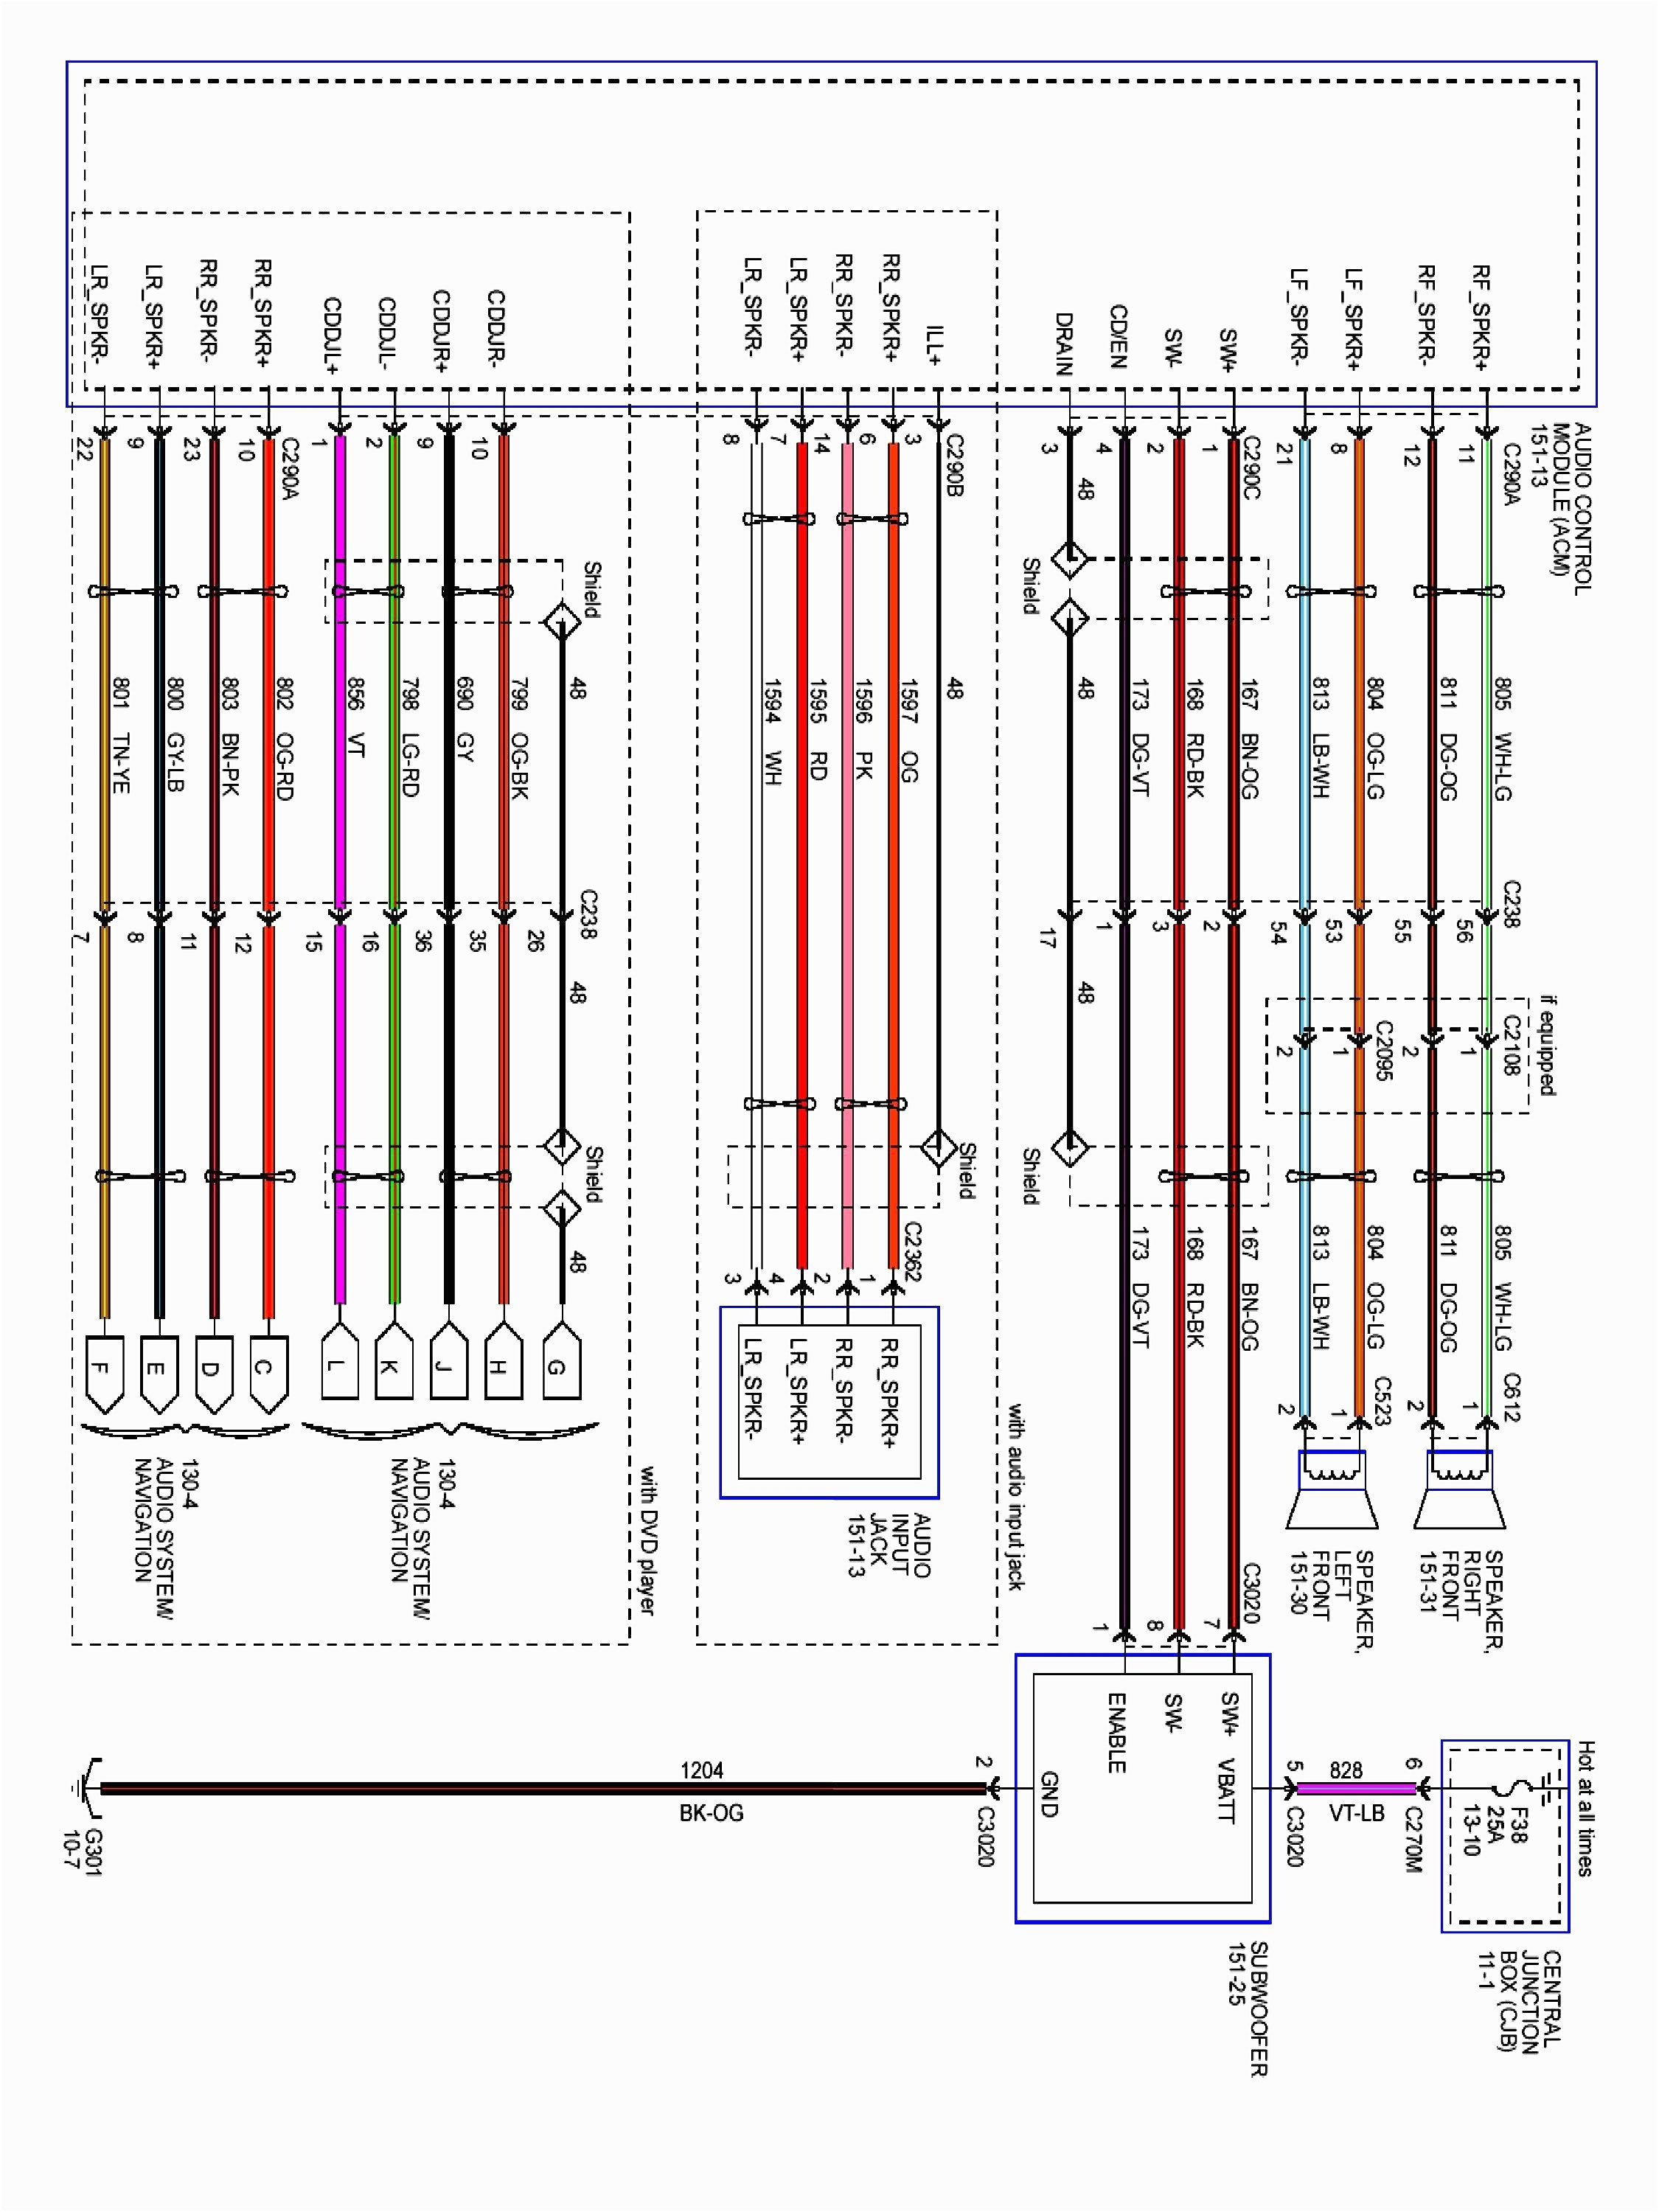 1994 ford f150 stereo wiring diagram book of 2005 ford f150 radio wiring diagram download of 1994 ford f150 stereo wiring diagram jpg